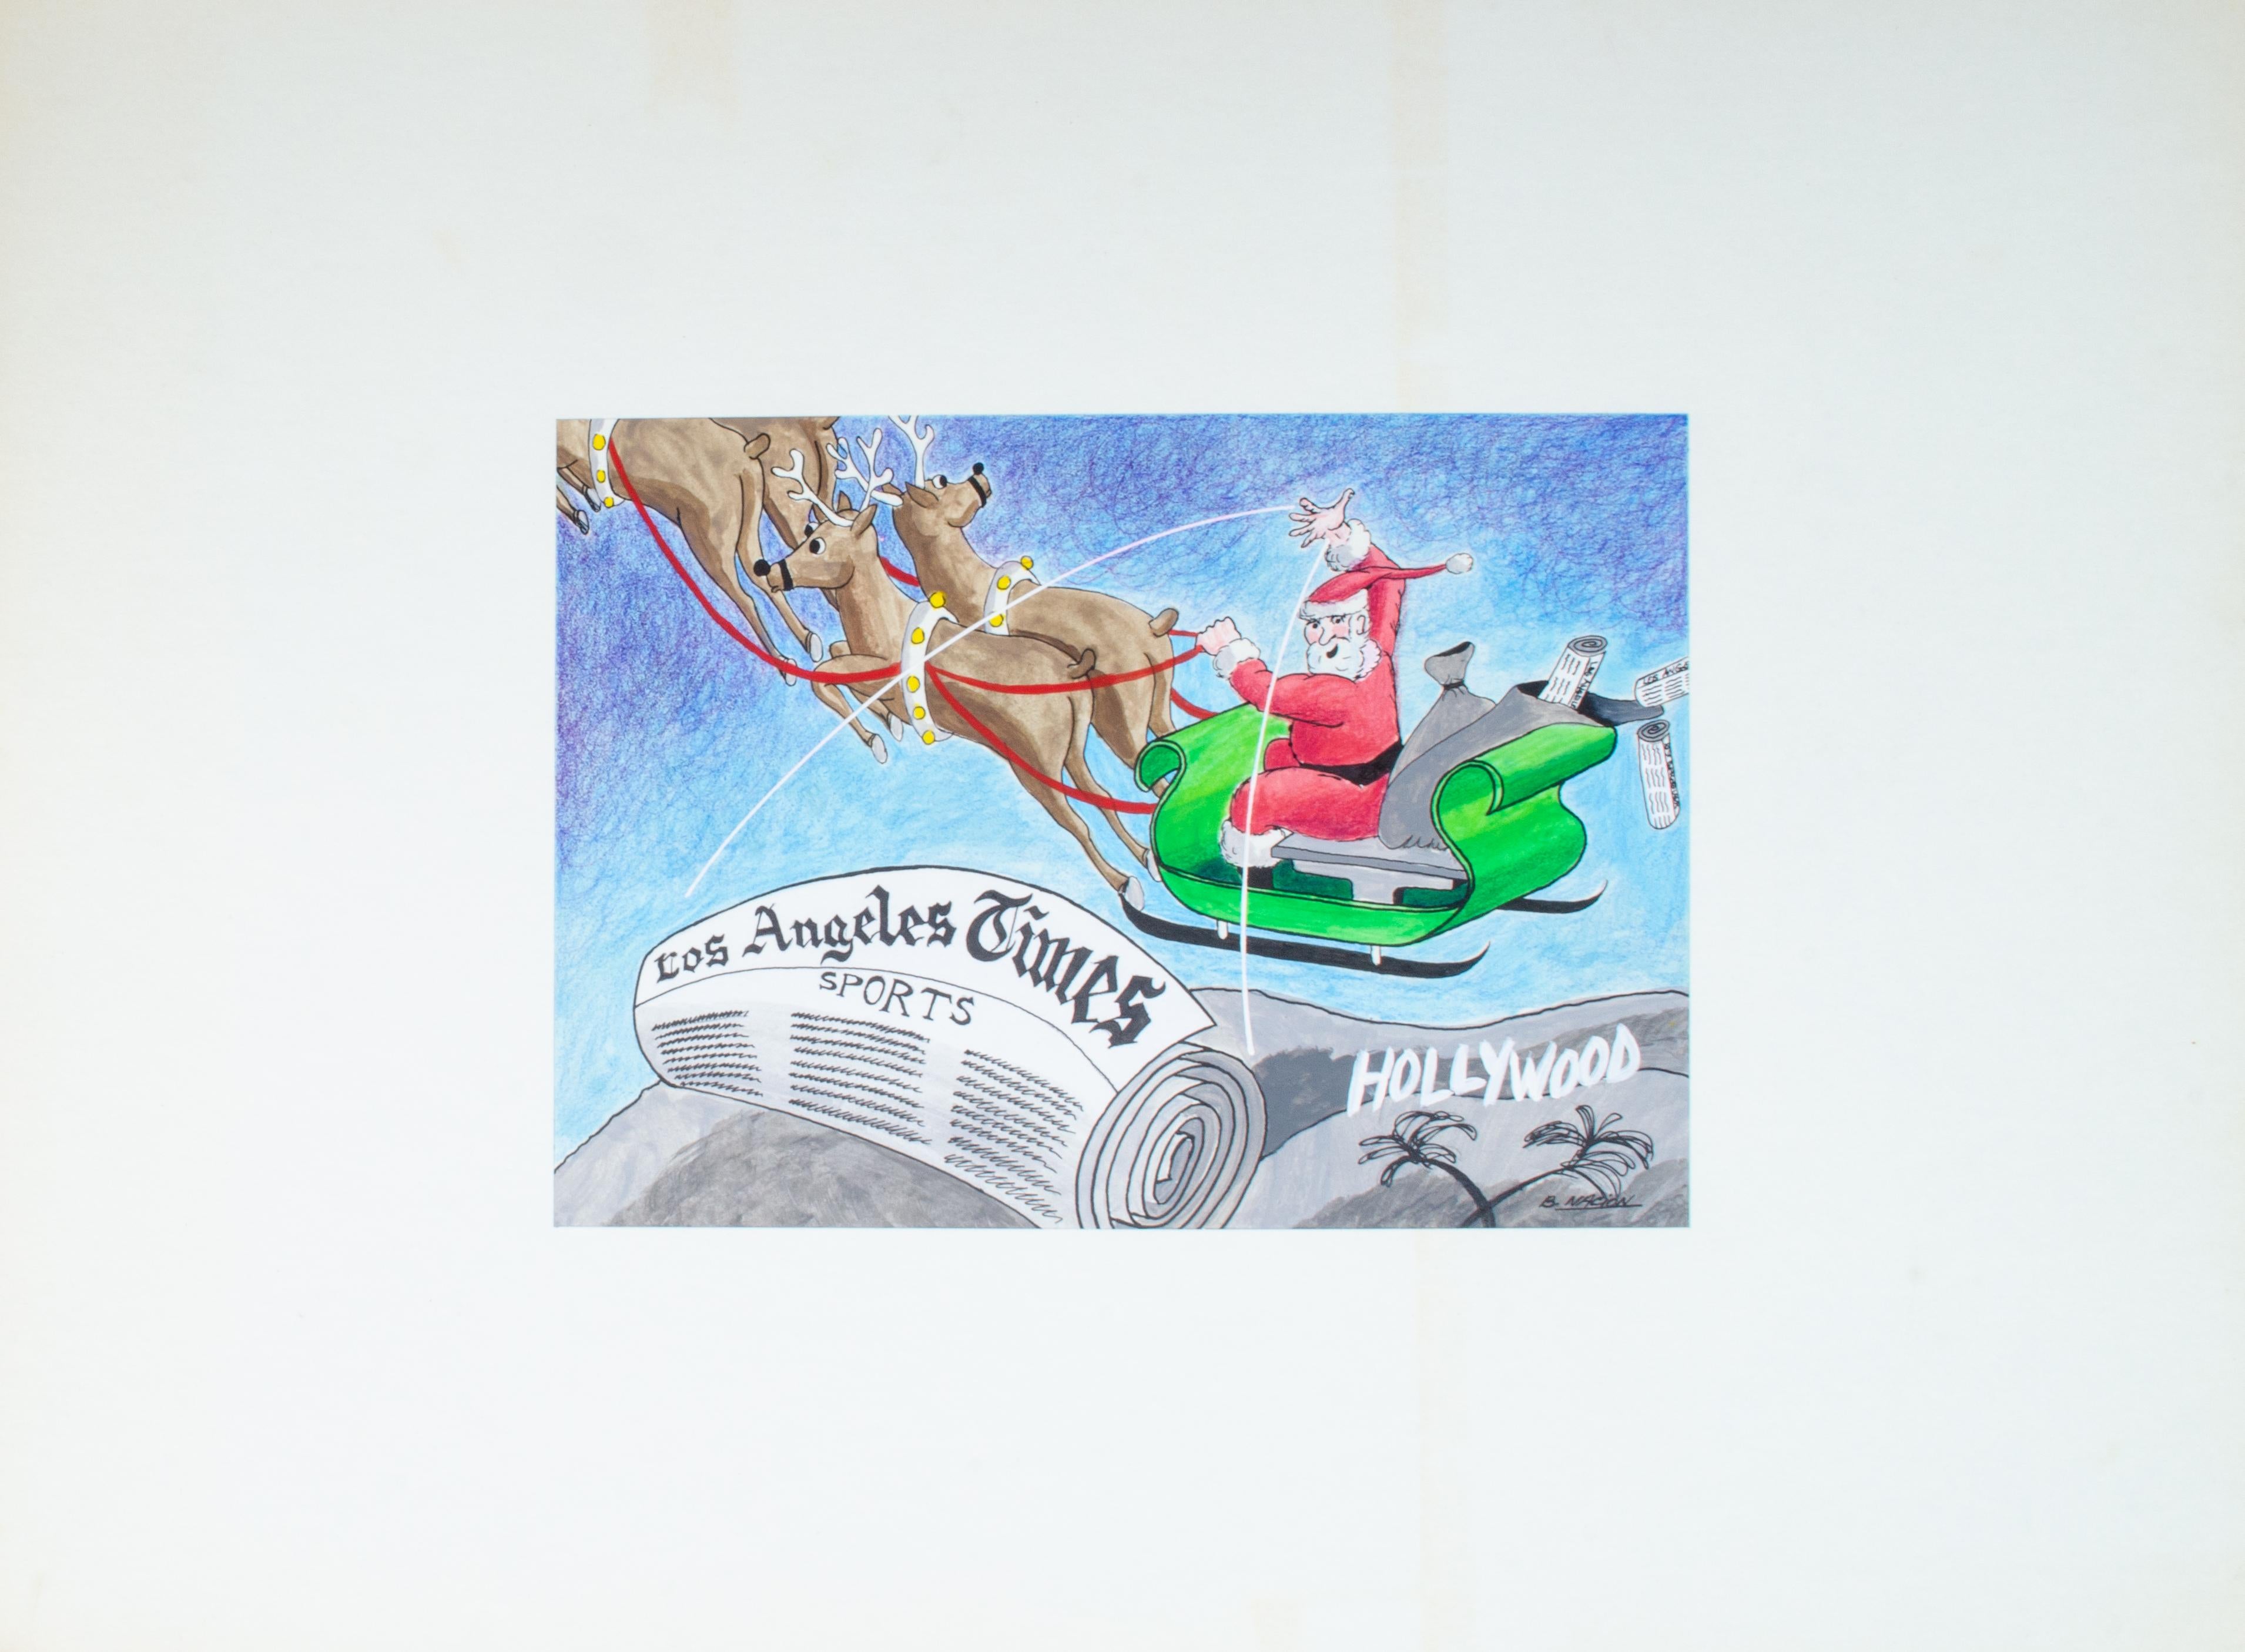 Bernard Nacion
Untitled (Santa Claus Over Los Angeles), Late 20th Century
Watercolor and pastel on artist board
Image: 7 x 9 3/4 in.
Board: 15 x 20 in.

Bernard Nacion is a creative whose imaginative compositions take many different shapes. He guest